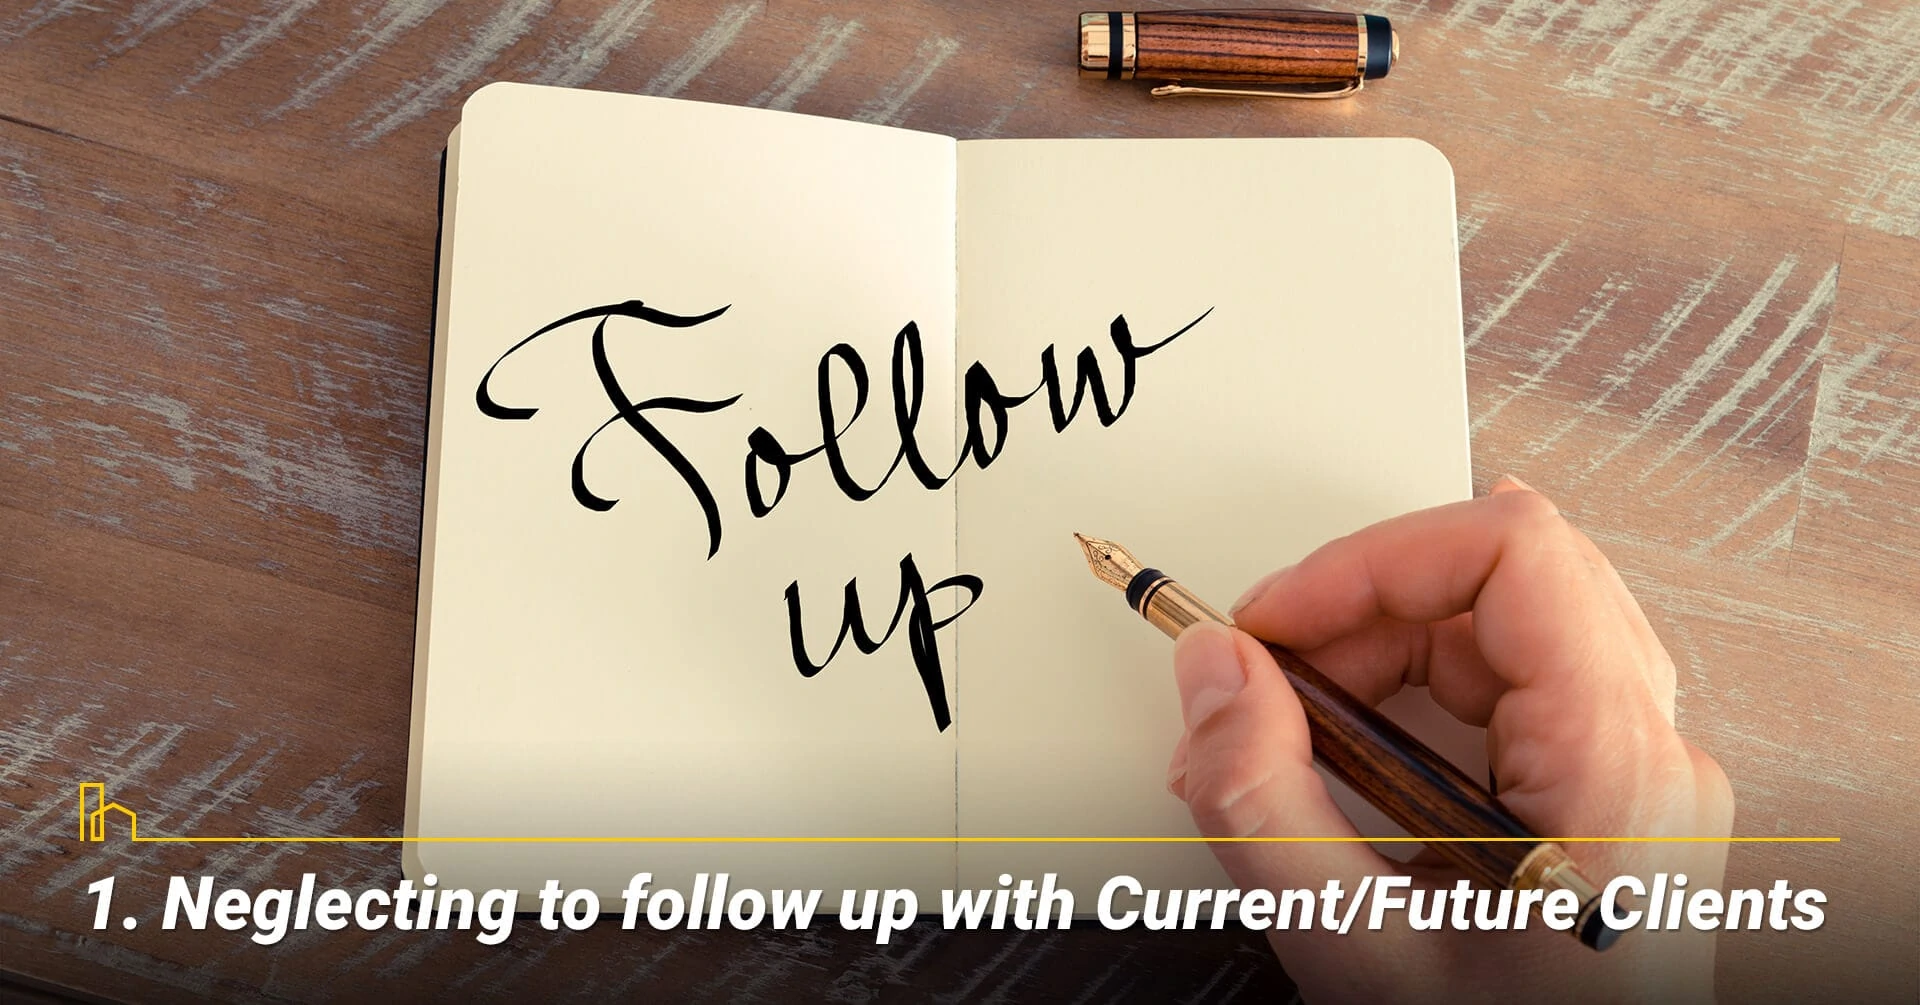 Neglecting to follow up with Current/Future Clients, make sure to follow up with your clients